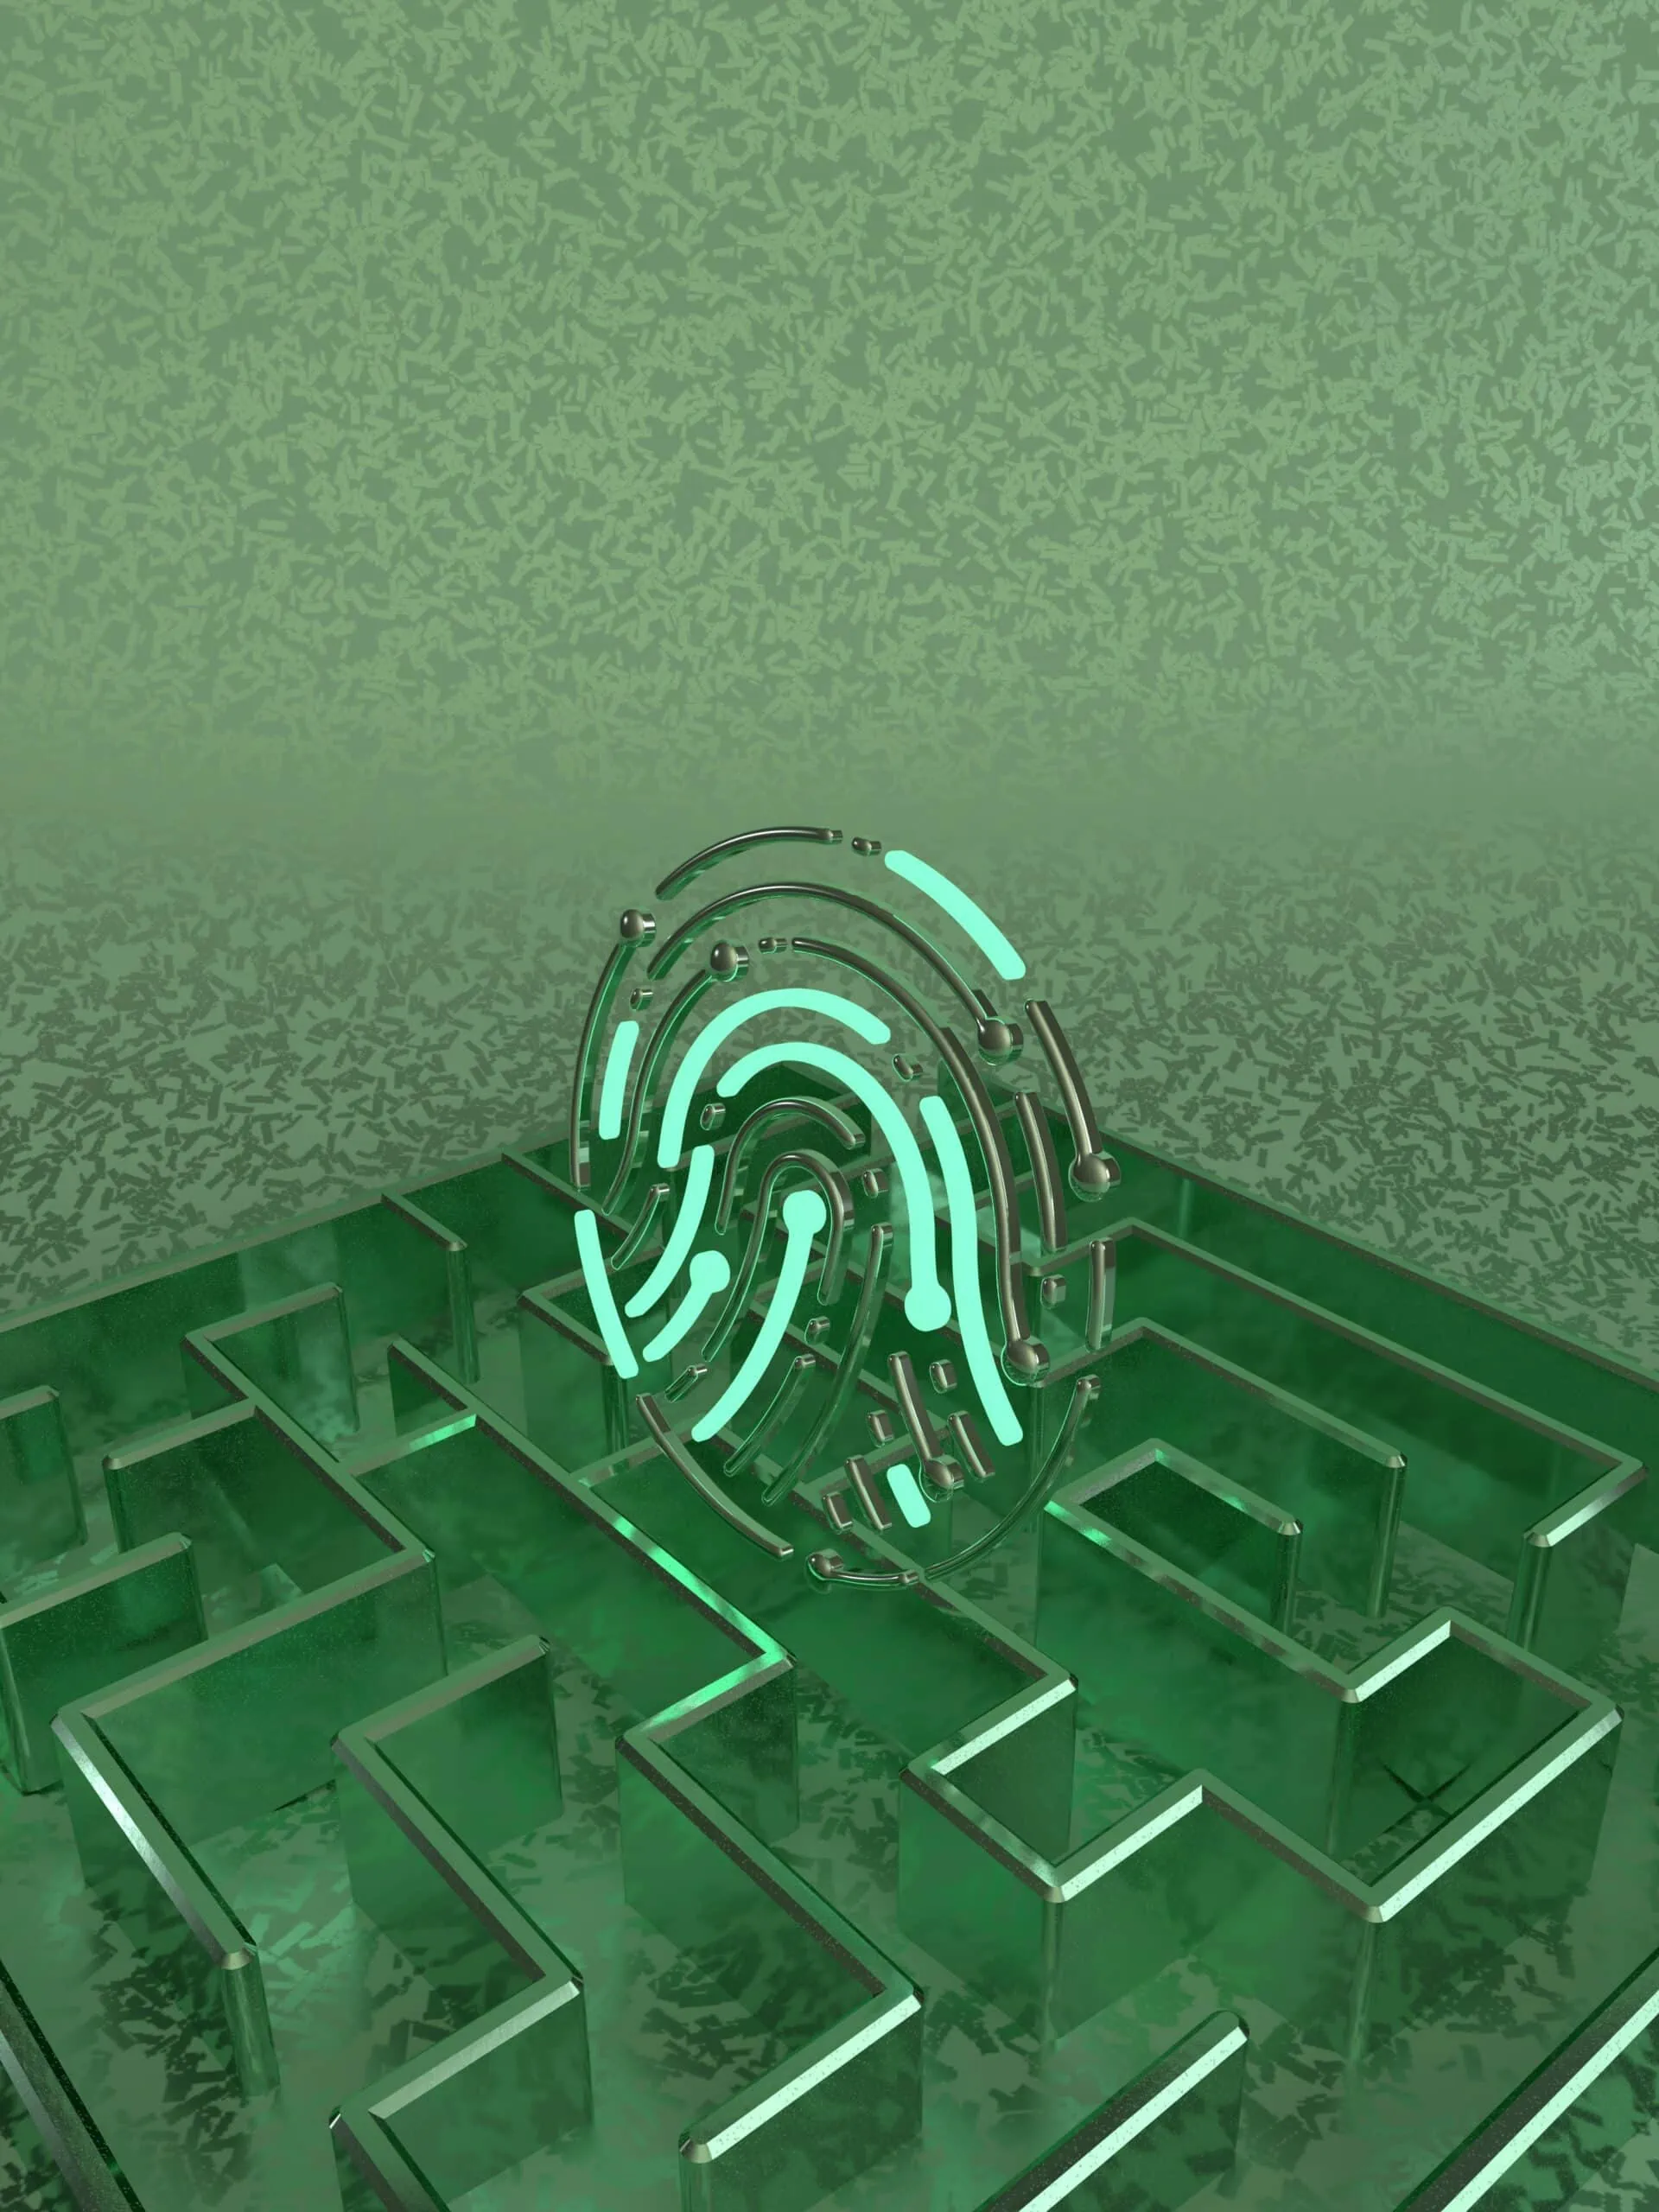 Finger print on top of maze that symbolizes AI security systems